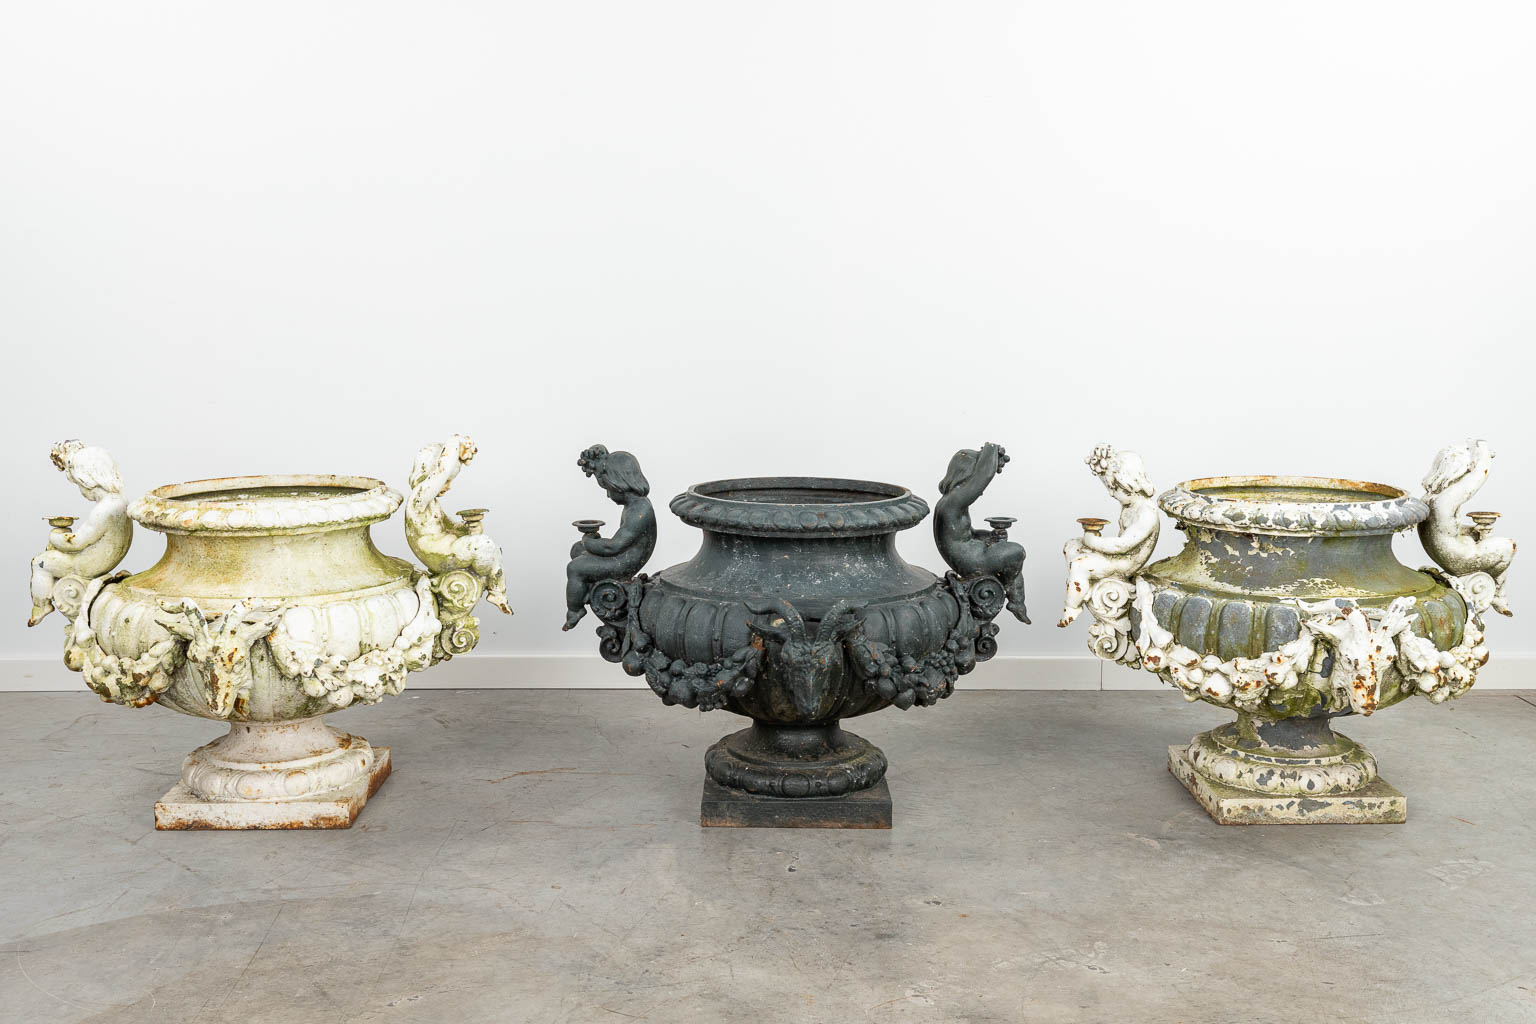 A set of 3 large garden vases made of cast iron, decorated with putti and ram's heads. (H:57cm) - Image 9 of 16